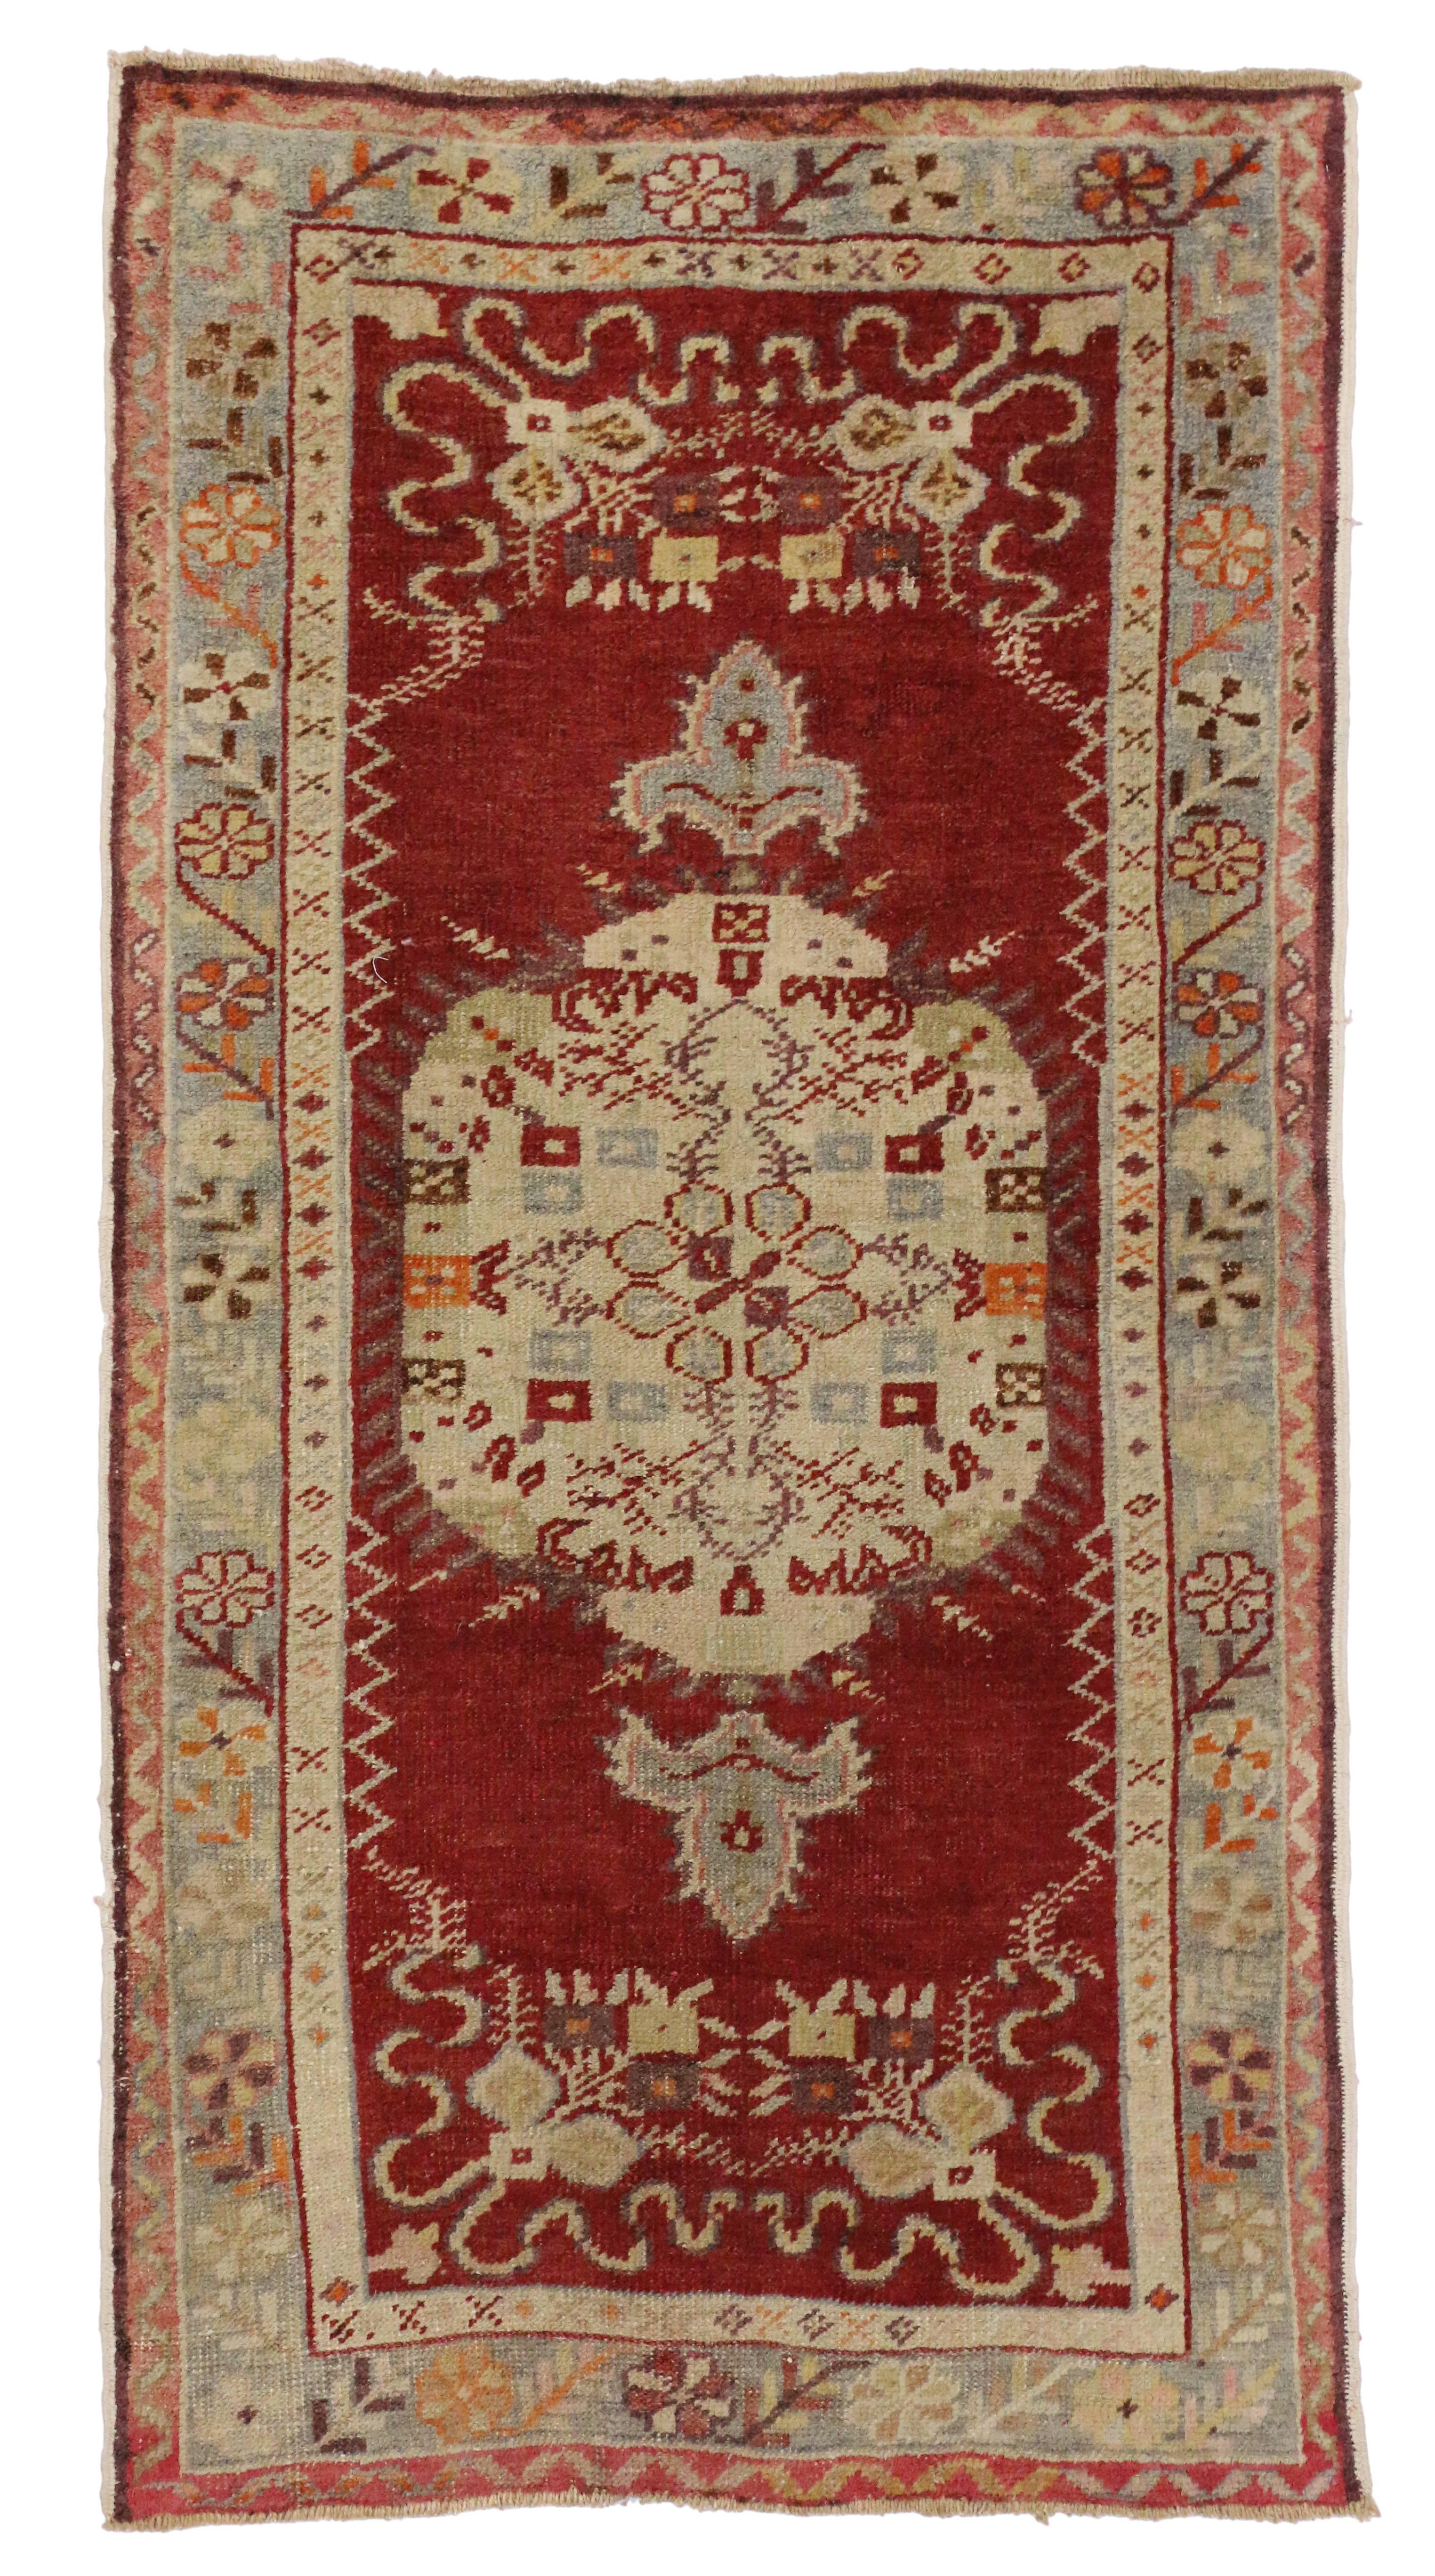 51449 vintage Turkish Oushak Accent rug with elegant style. This vintage Turkish Oushak rug features a central medallion in creamy-beige filled with red stylized geometric flowers to the centre bordered in pumpkin, muted cerulean, plum, ripe berry